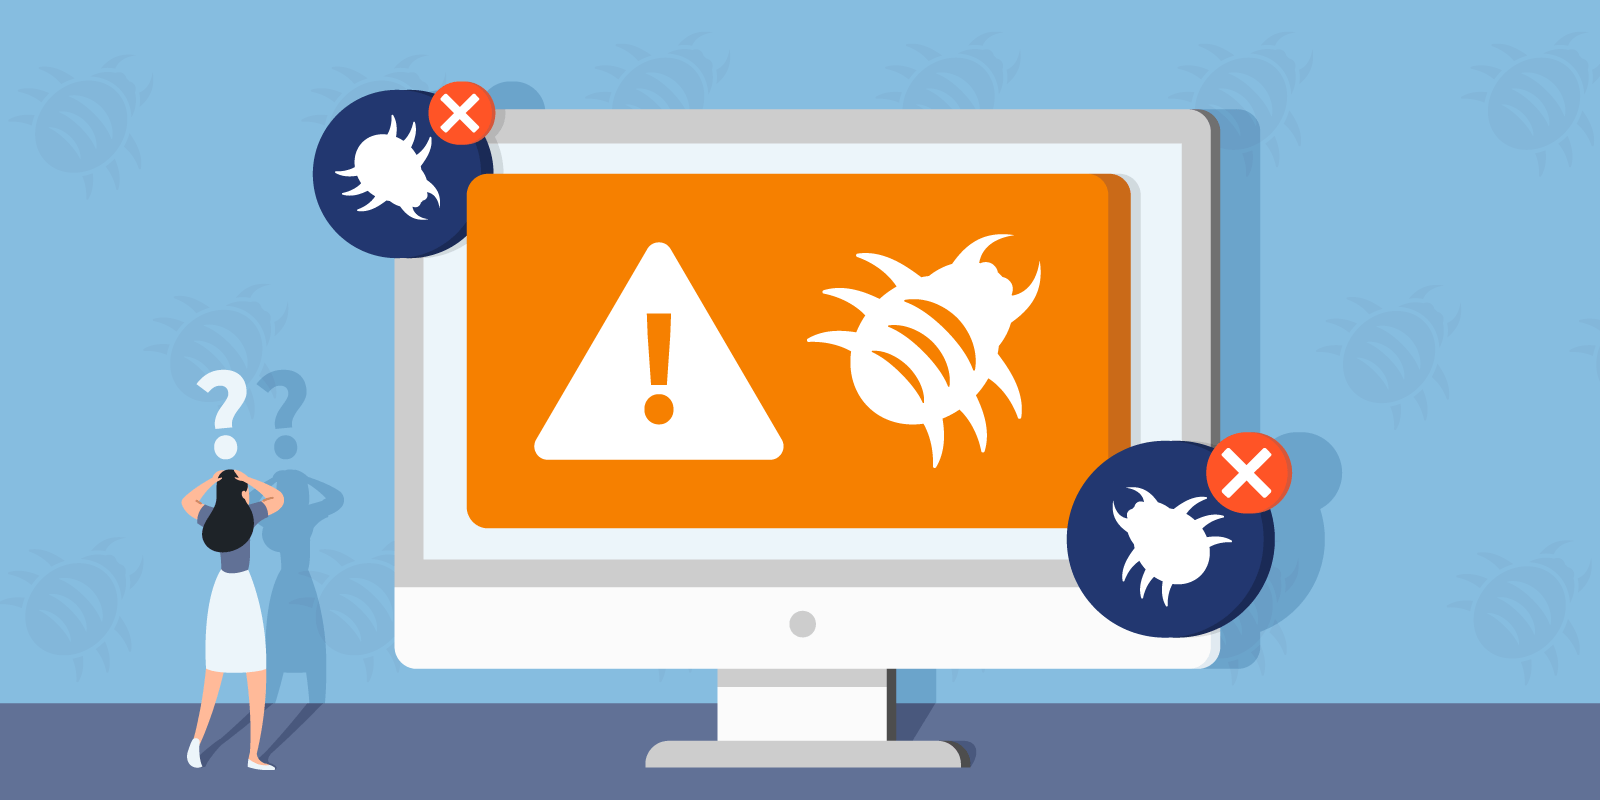 Use a reputable antivirus or anti-malware program to scan your computer for any malware or viruses.
If any malicious software is detected, follow the program's instructions to remove it from your system.